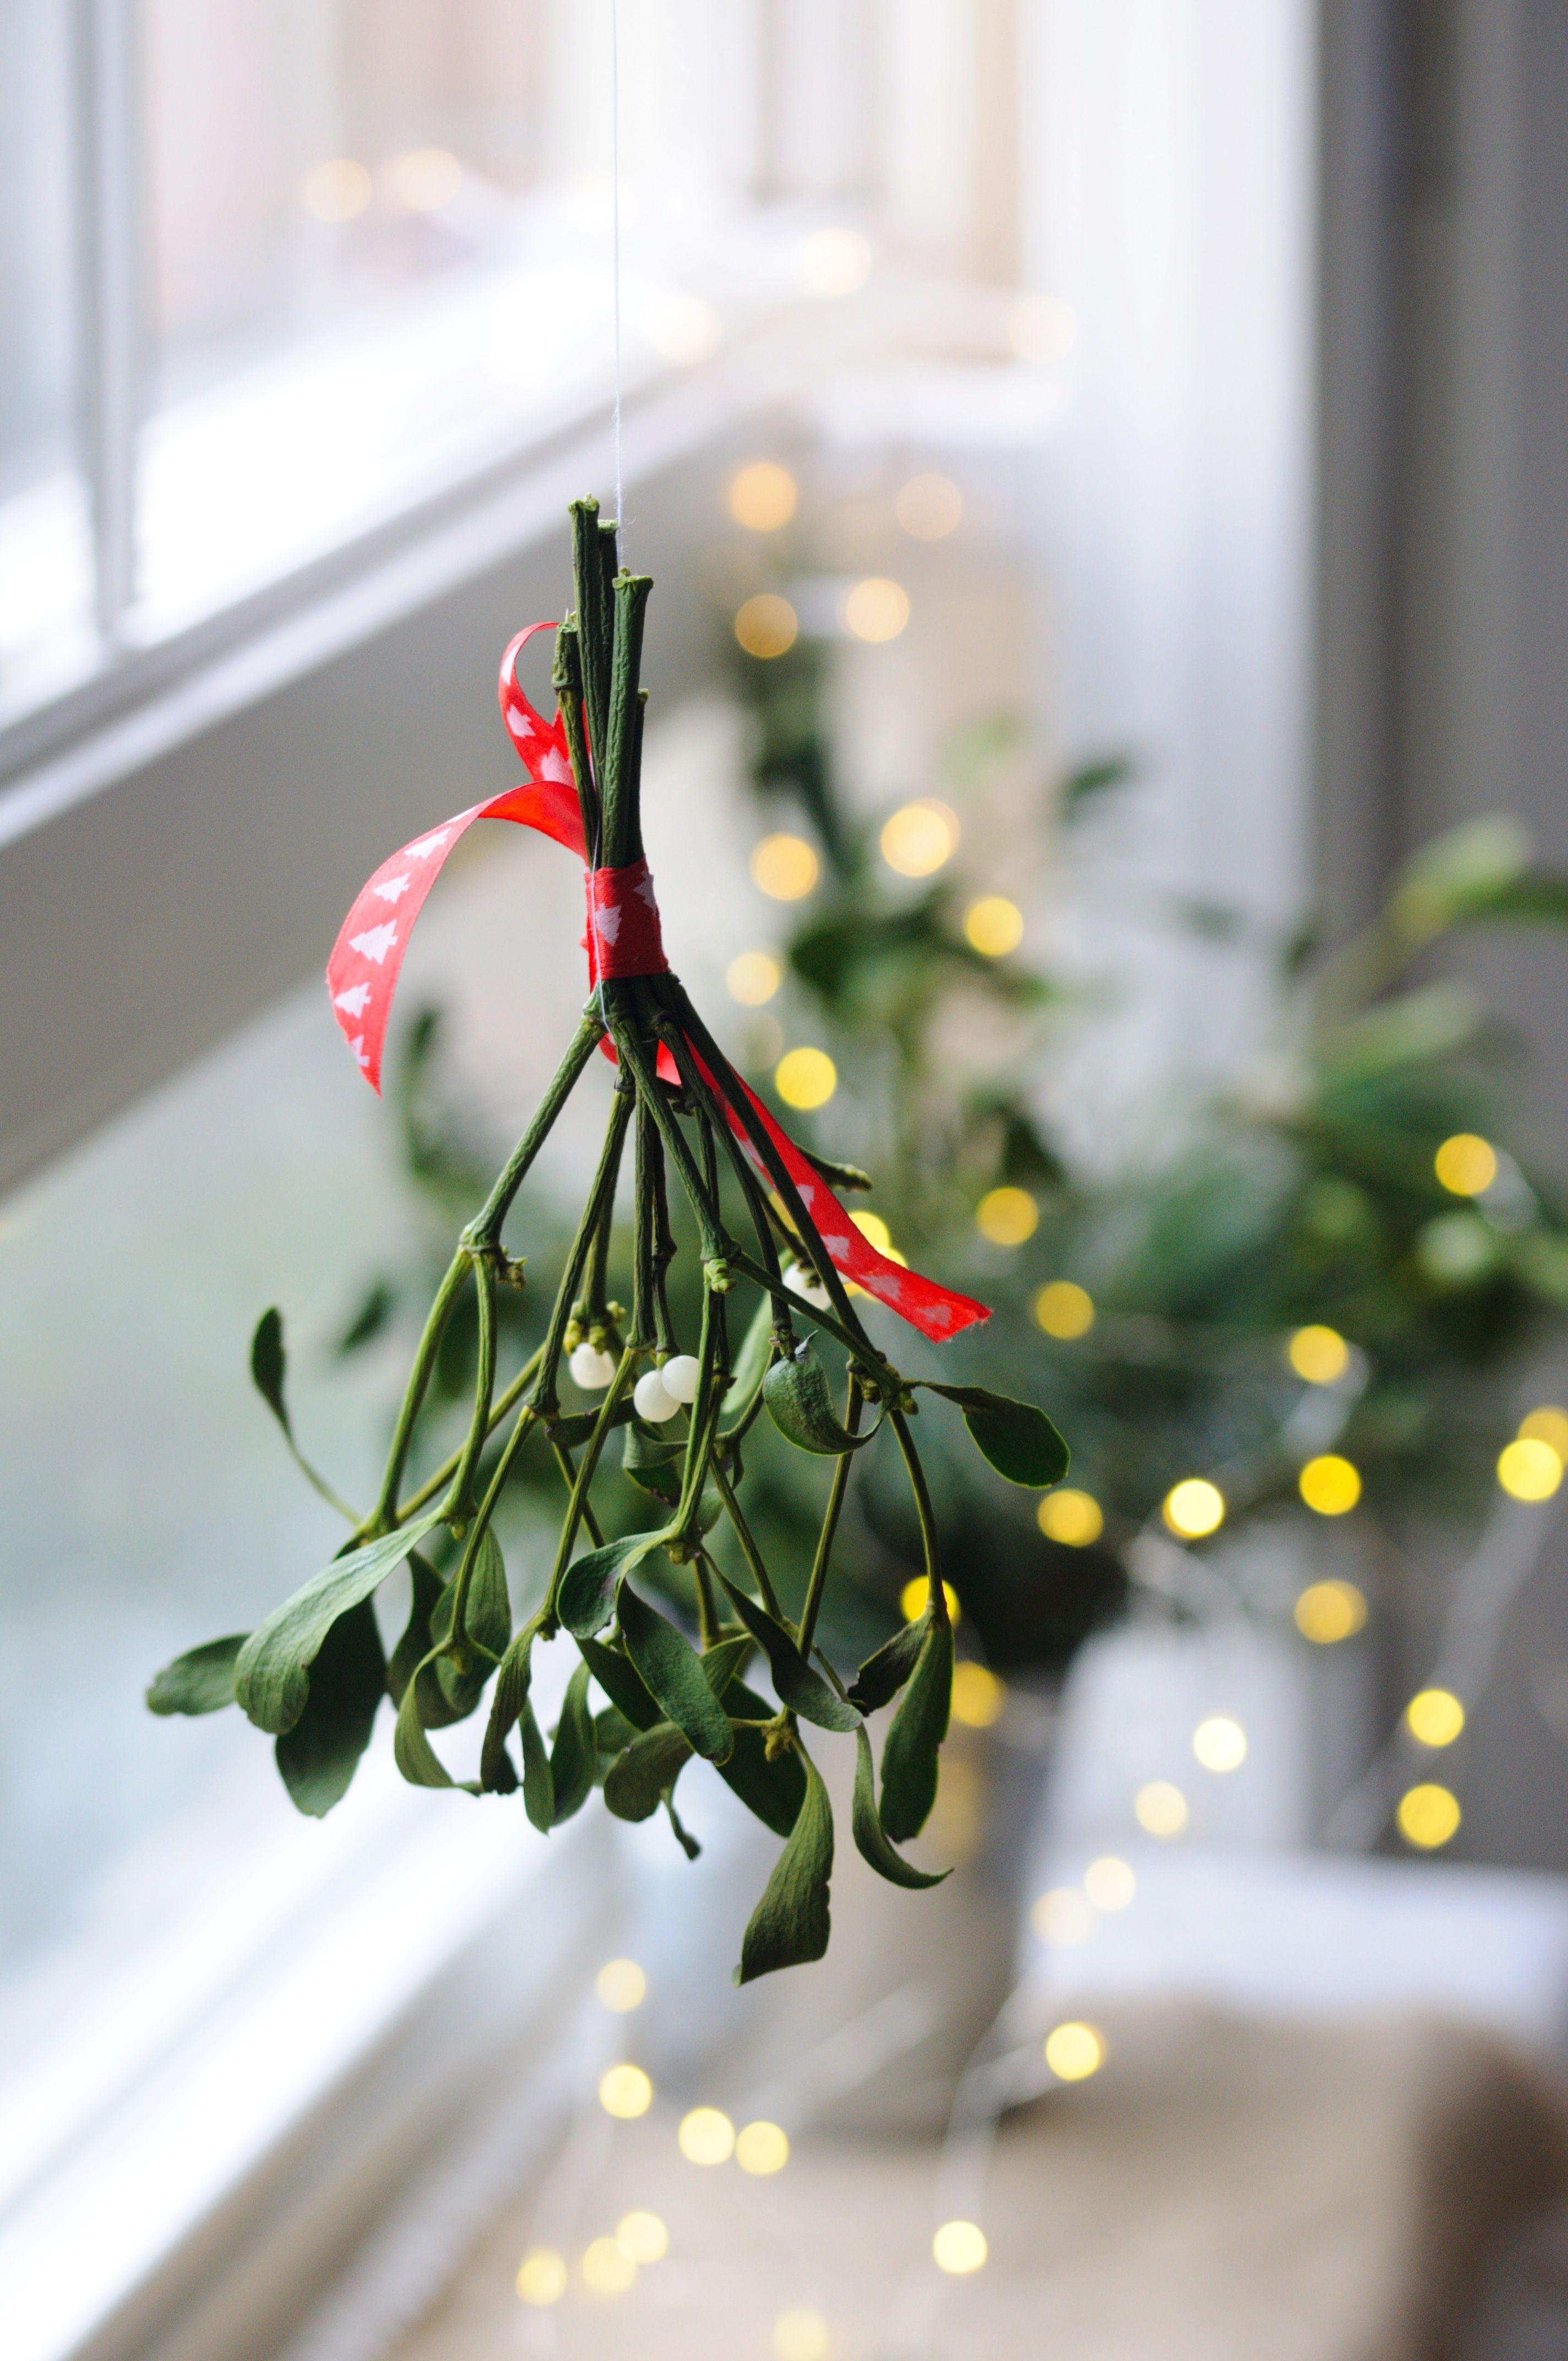 How to Incorporate Your Houseplants Into Your Holiday Decor